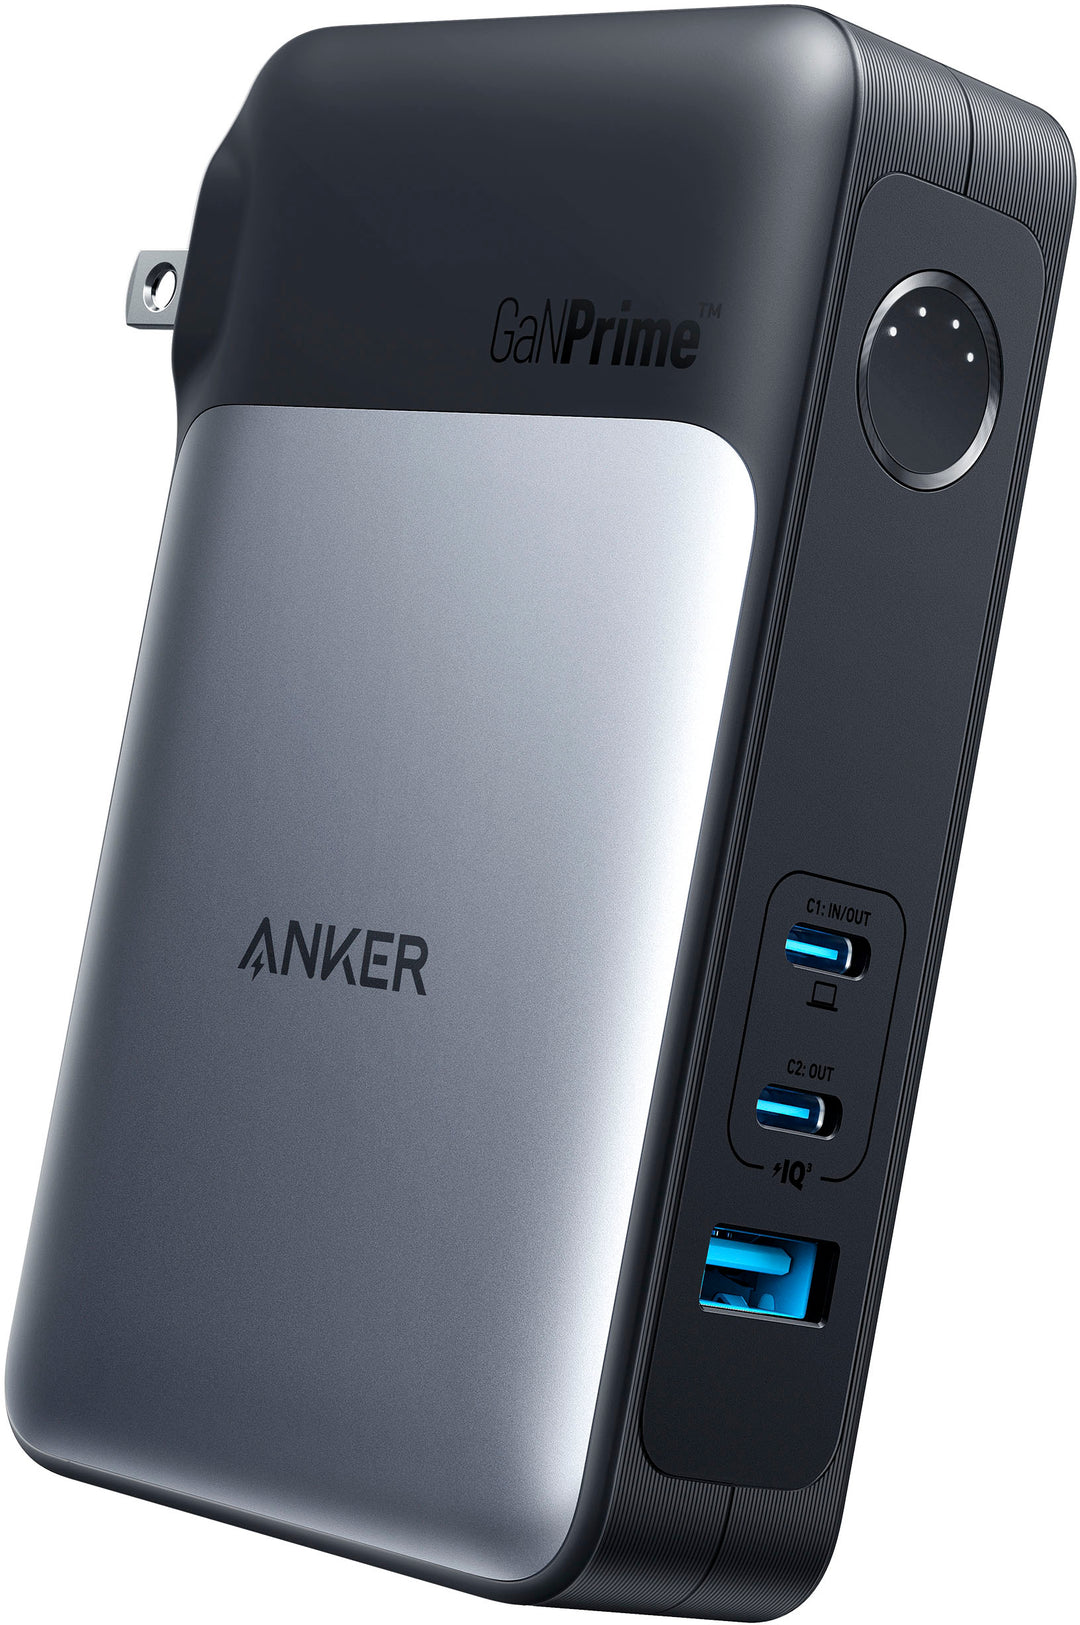 Anker - 733 10k mAh 2-in-1 Portable Battery with GaN and 65W Fast Wall charger for iPhone, Samsung, Tablets, and Laptops - Black_1